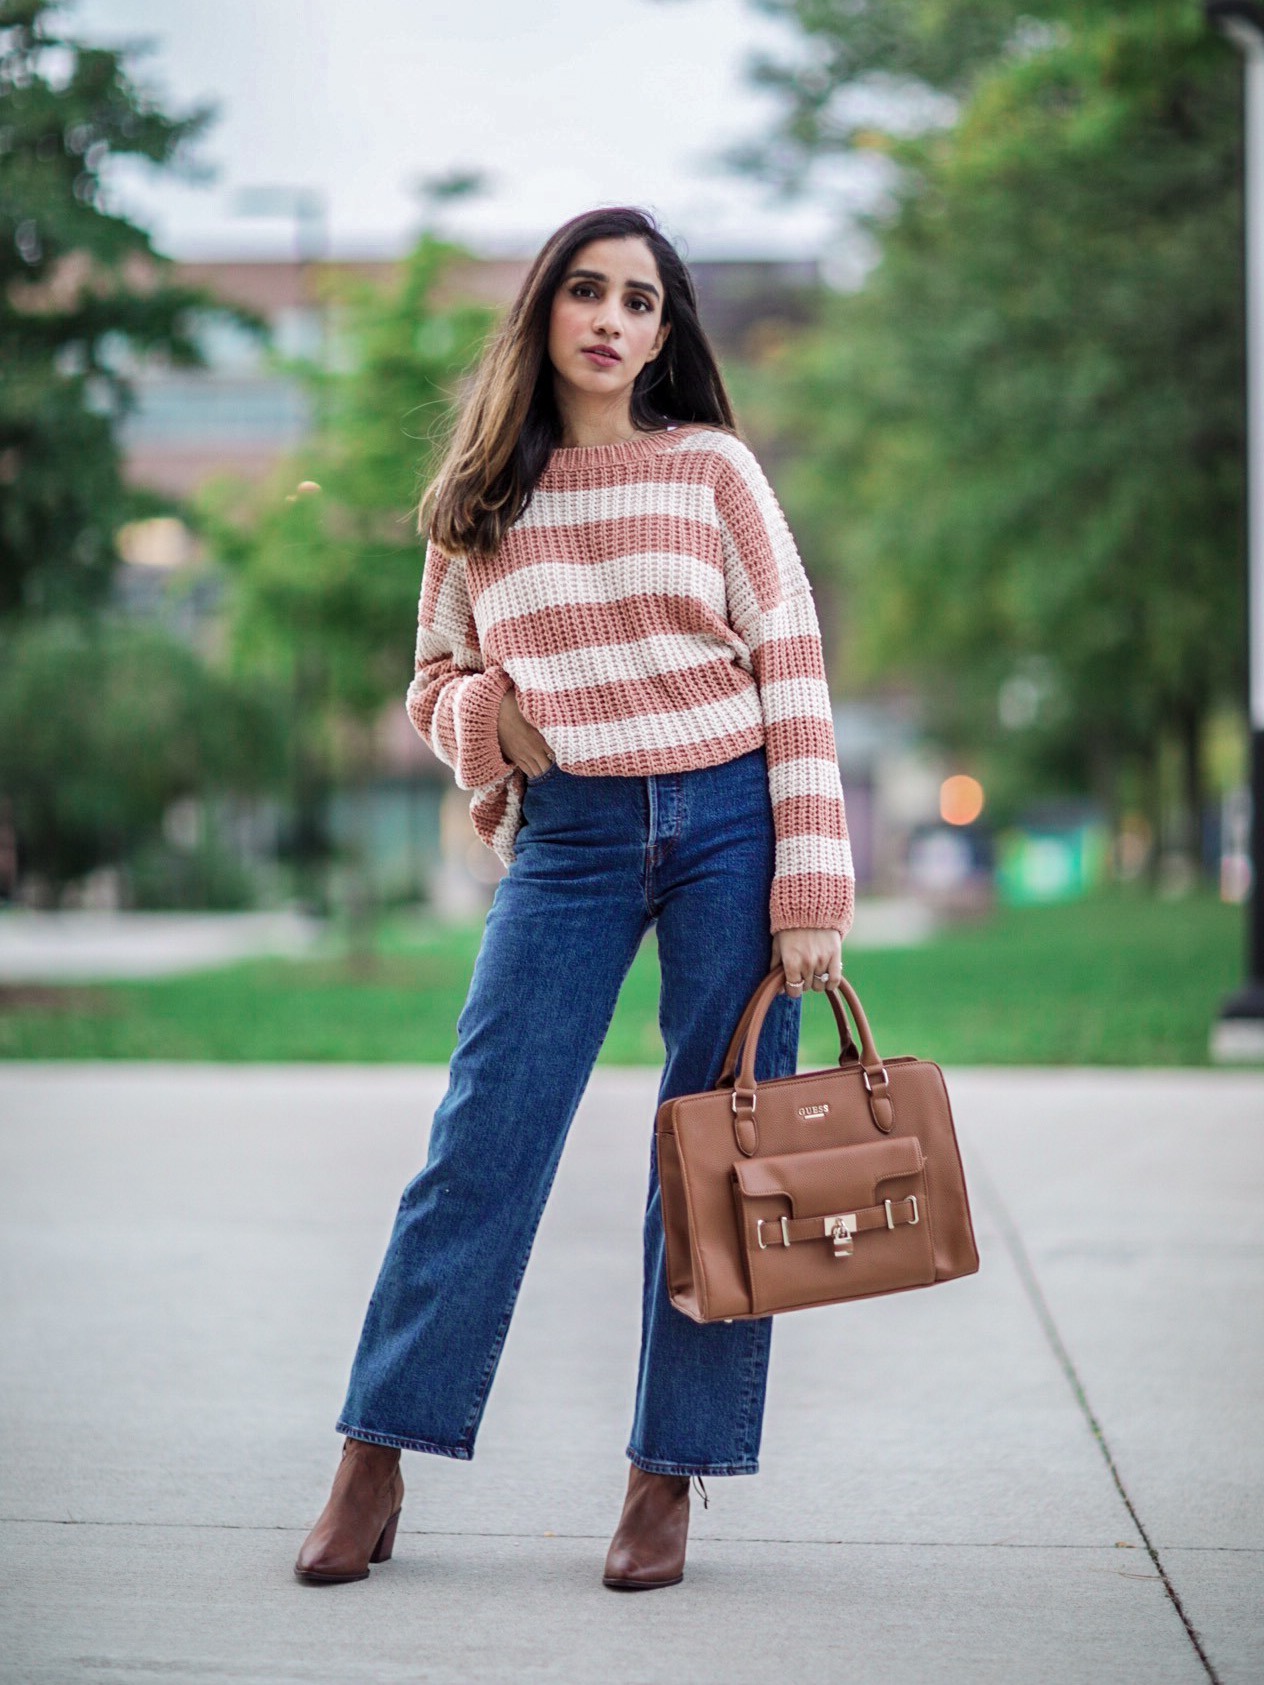 5 Fall Staples You Need in Your Closet sincerelyhumble faiza inam fall wardrobe staples look 2020 must haves full look 5